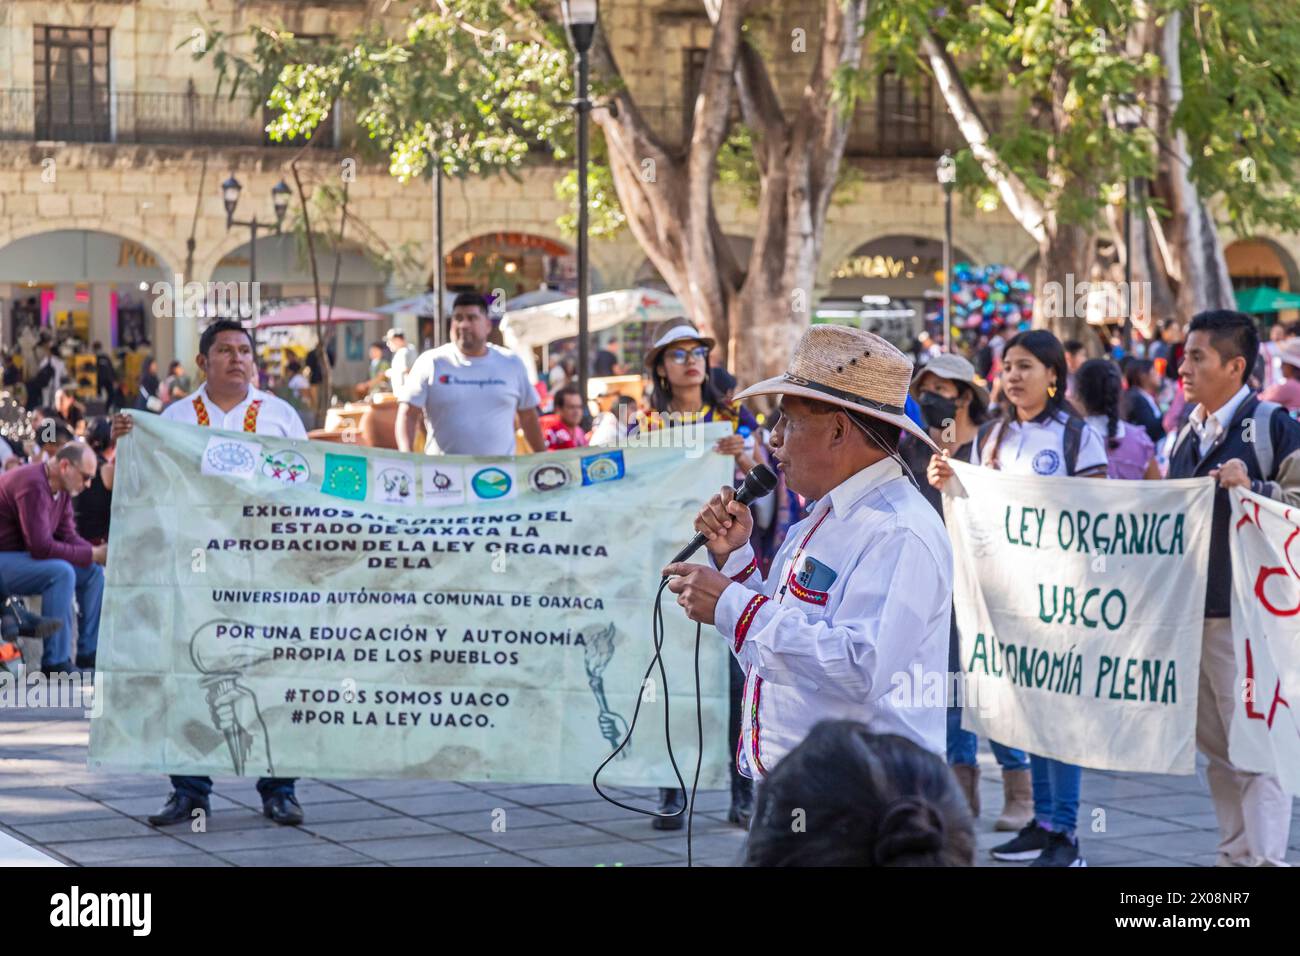 Oaxaca, Mexico - Teachers and students rally to defend the autonomy of the Universidad Autonoma Communal de Oaxaca. UACO is Mexico's first officially Stock Photo